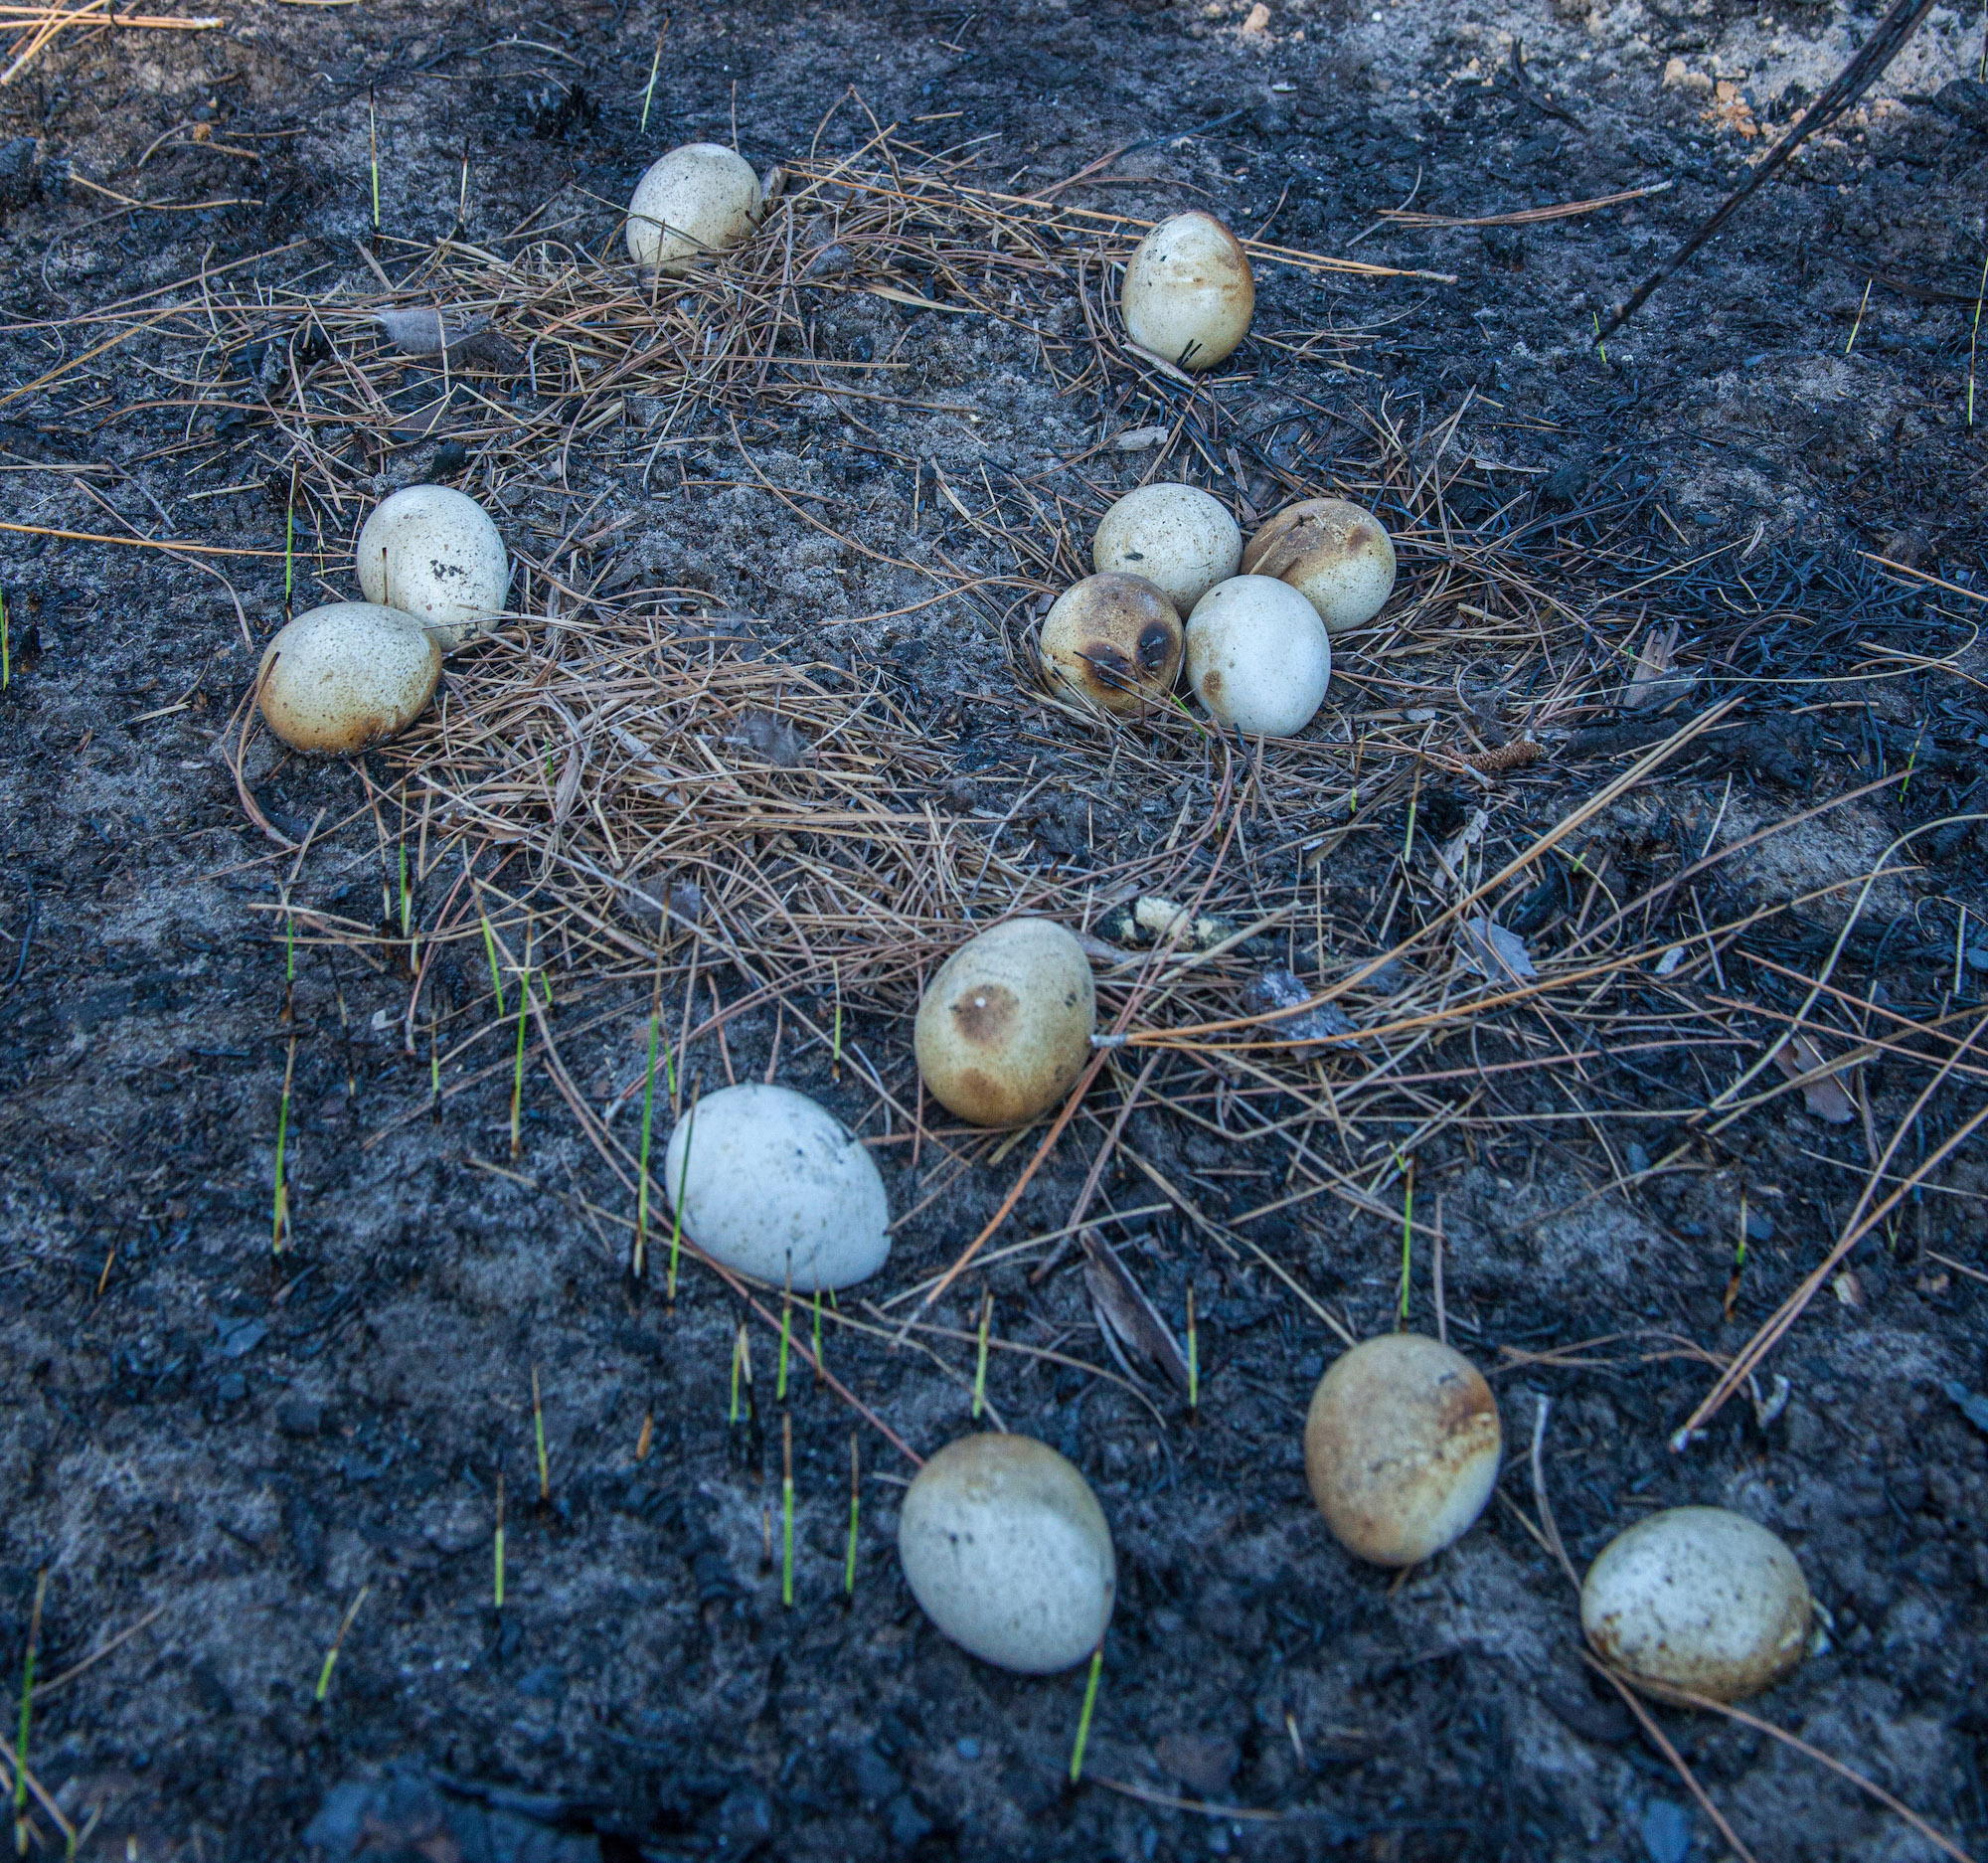 Turkey eggs destroyed by a wilfired